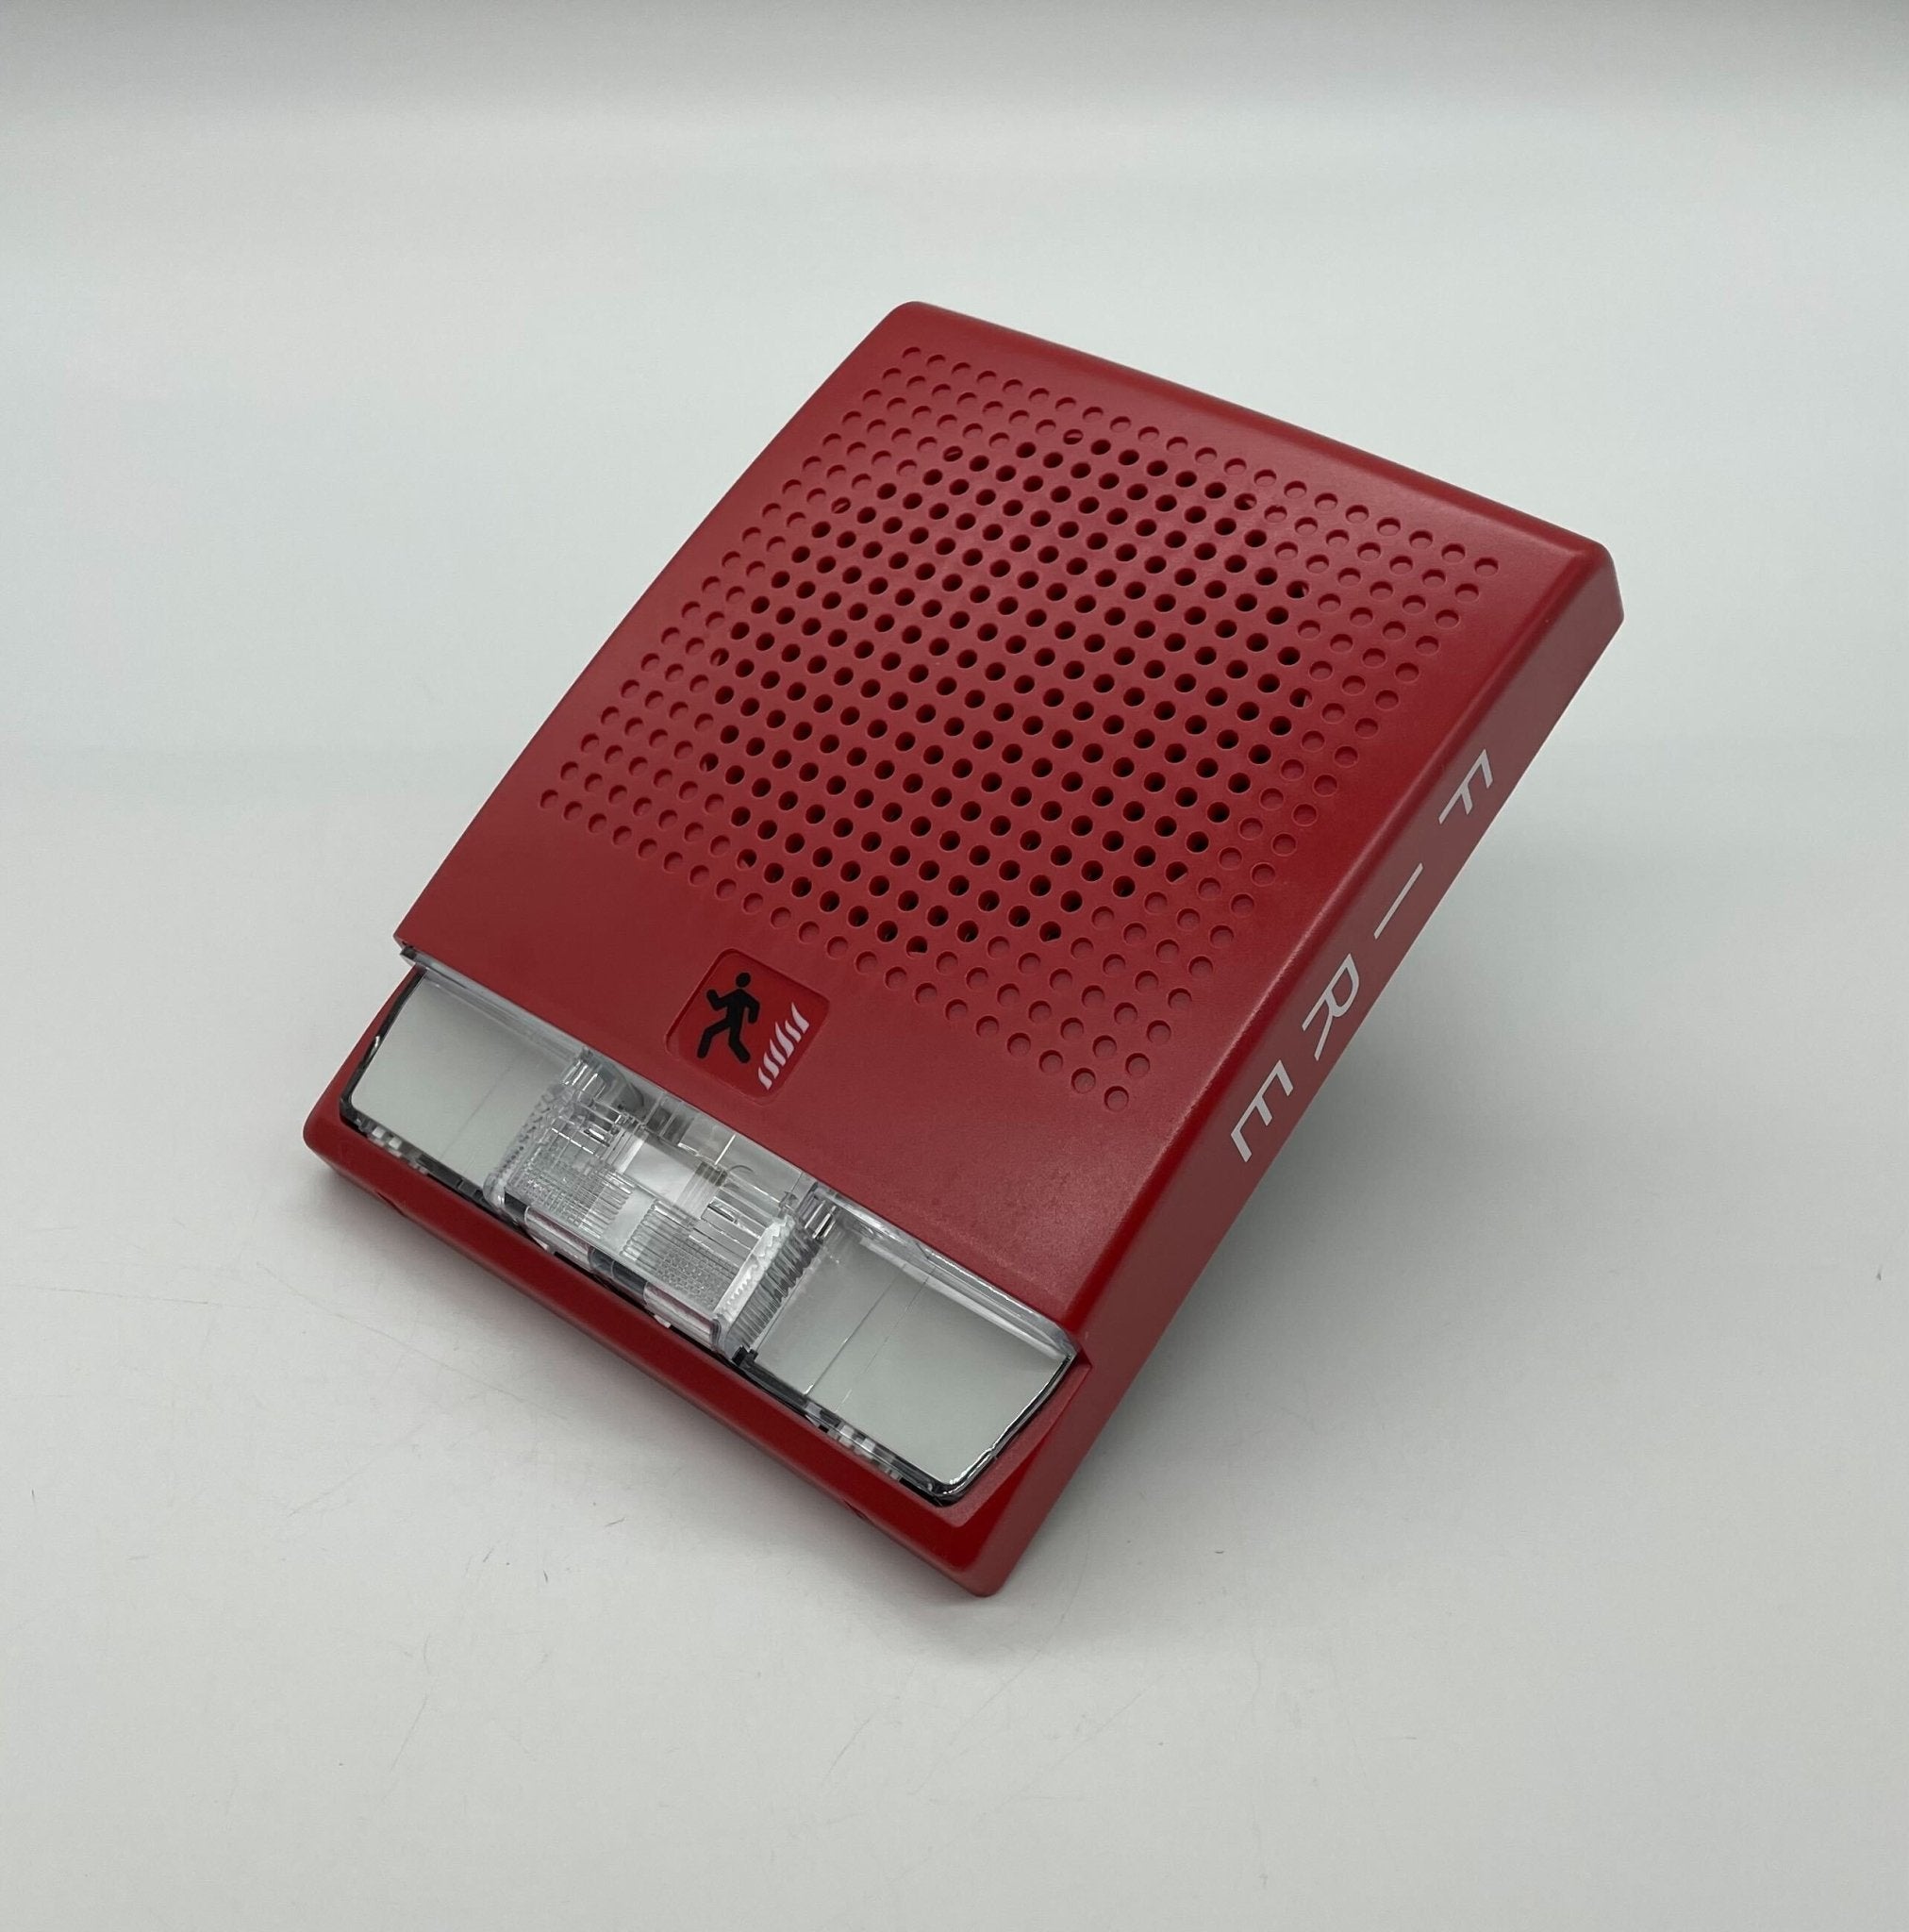 Edwards G4HFRF-S7VMC - The Fire Alarm Supplier